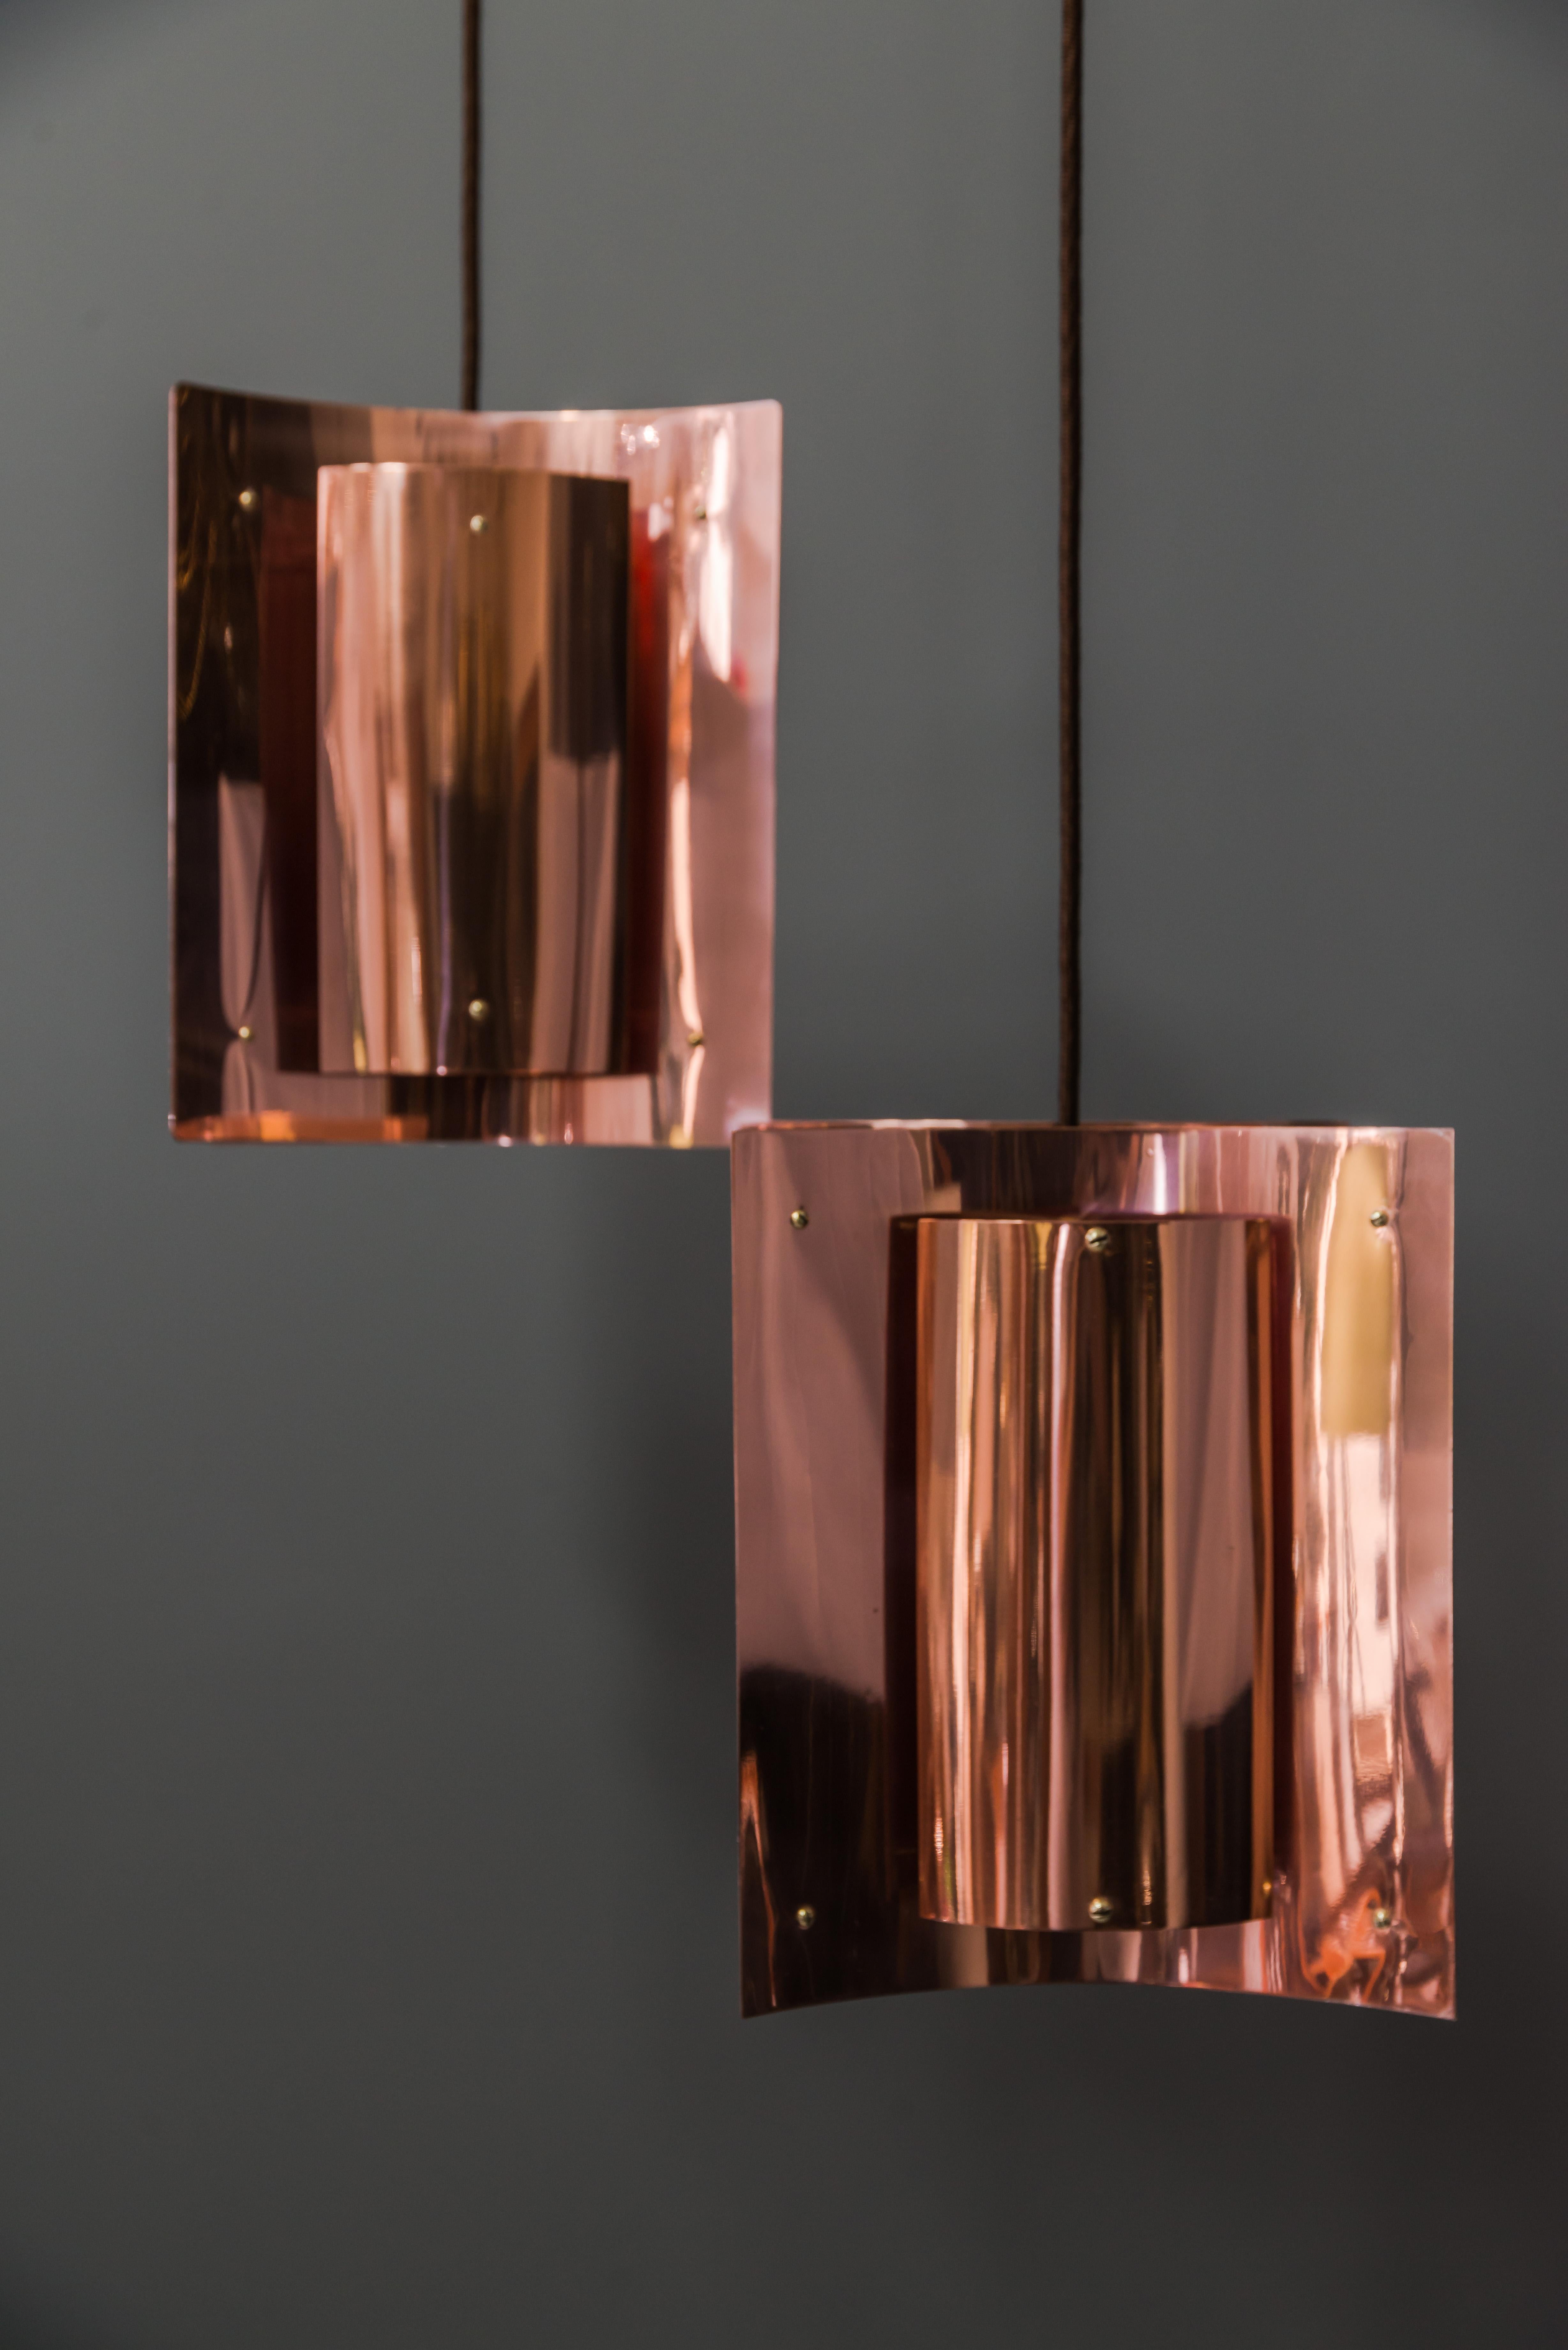 Danish Copper Pendant Lamp by Svend Aage Holm Sørensen, 1960s
Polished and stove enamelled